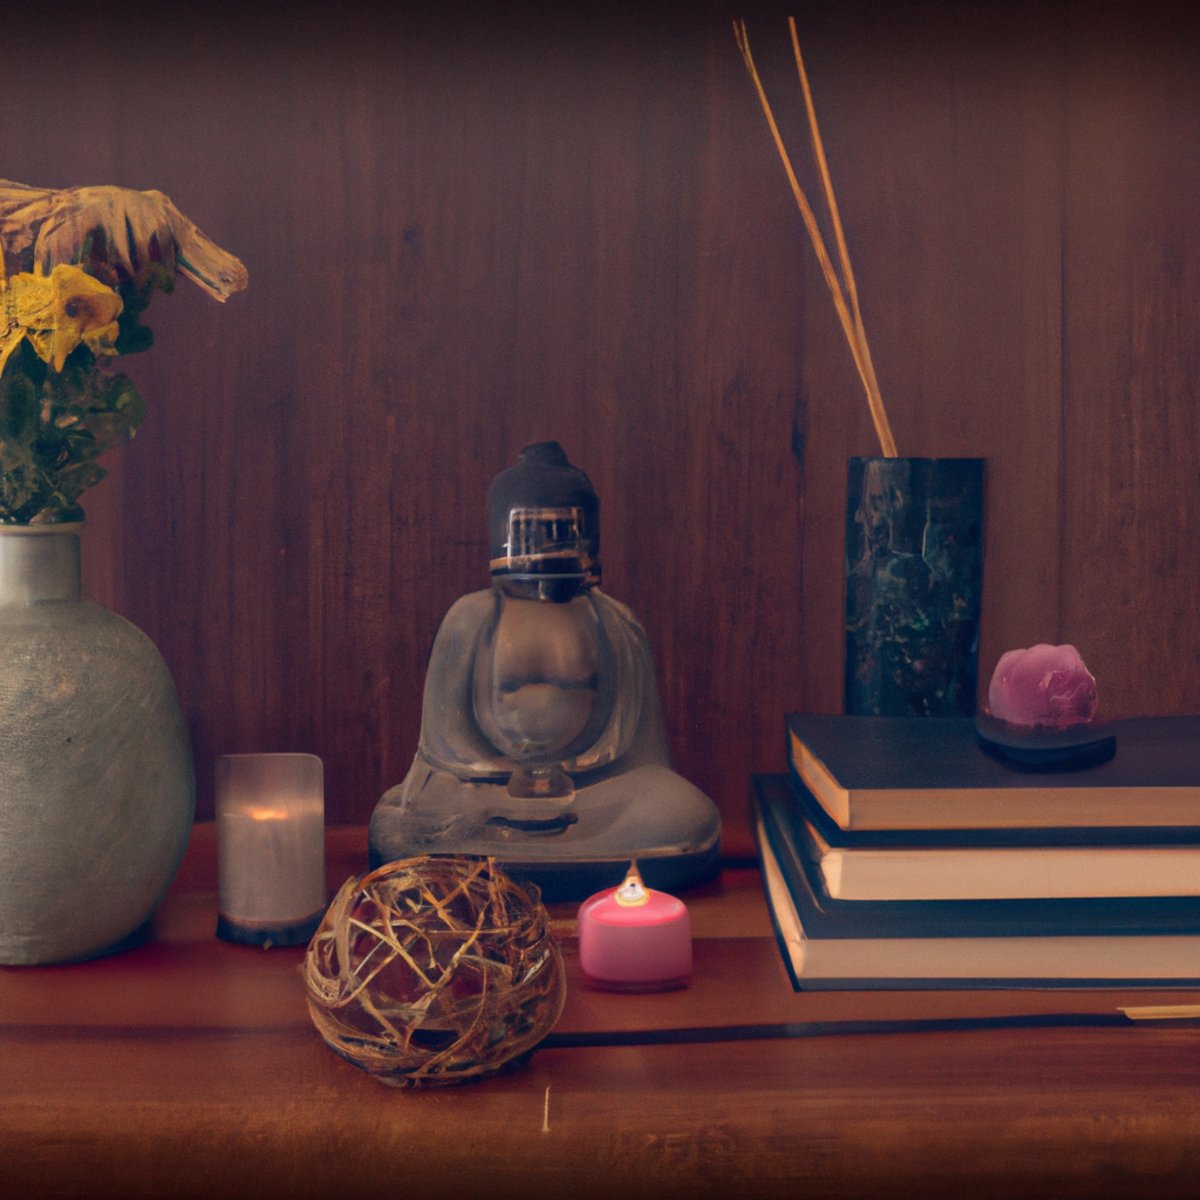 The photo depicts a serene scene of a wooden table with various objects arranged in a mindful manner. A small Buddha statue sits at the center, surrounded by a stack of books on meditation and a vase of fresh flowers. A lit candle and incense stick emit a calming aroma, while a soft cushion invites the viewer to sit and meditate. The natural light streaming in from a nearby window adds to the peaceful ambiance of the photo.